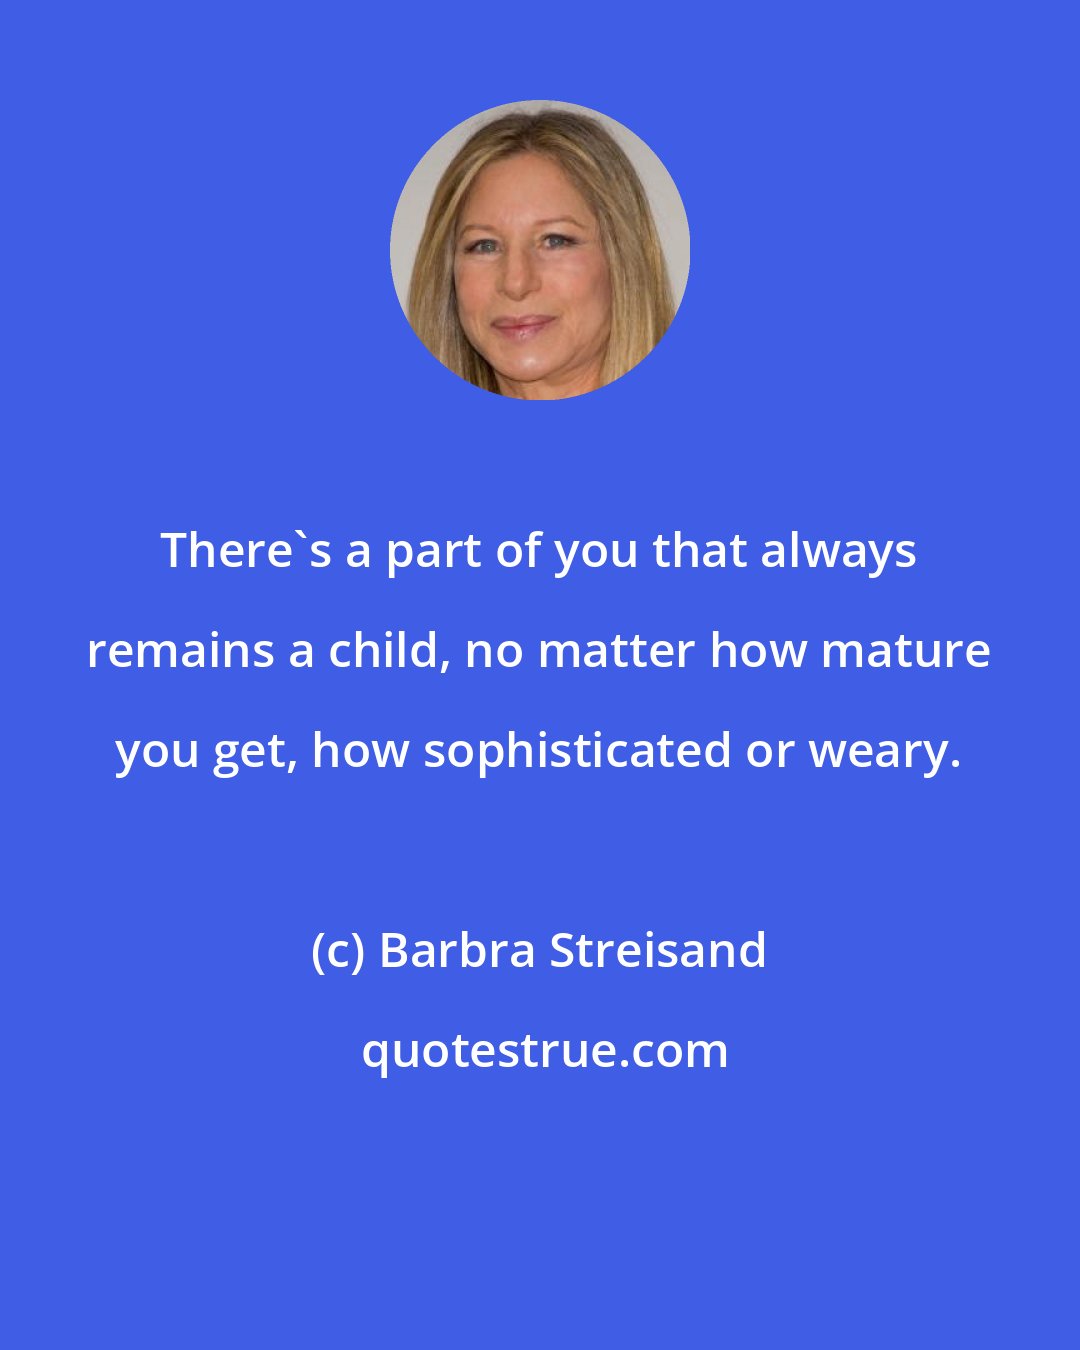 Barbra Streisand: There's a part of you that always remains a child, no matter how mature you get, how sophisticated or weary.